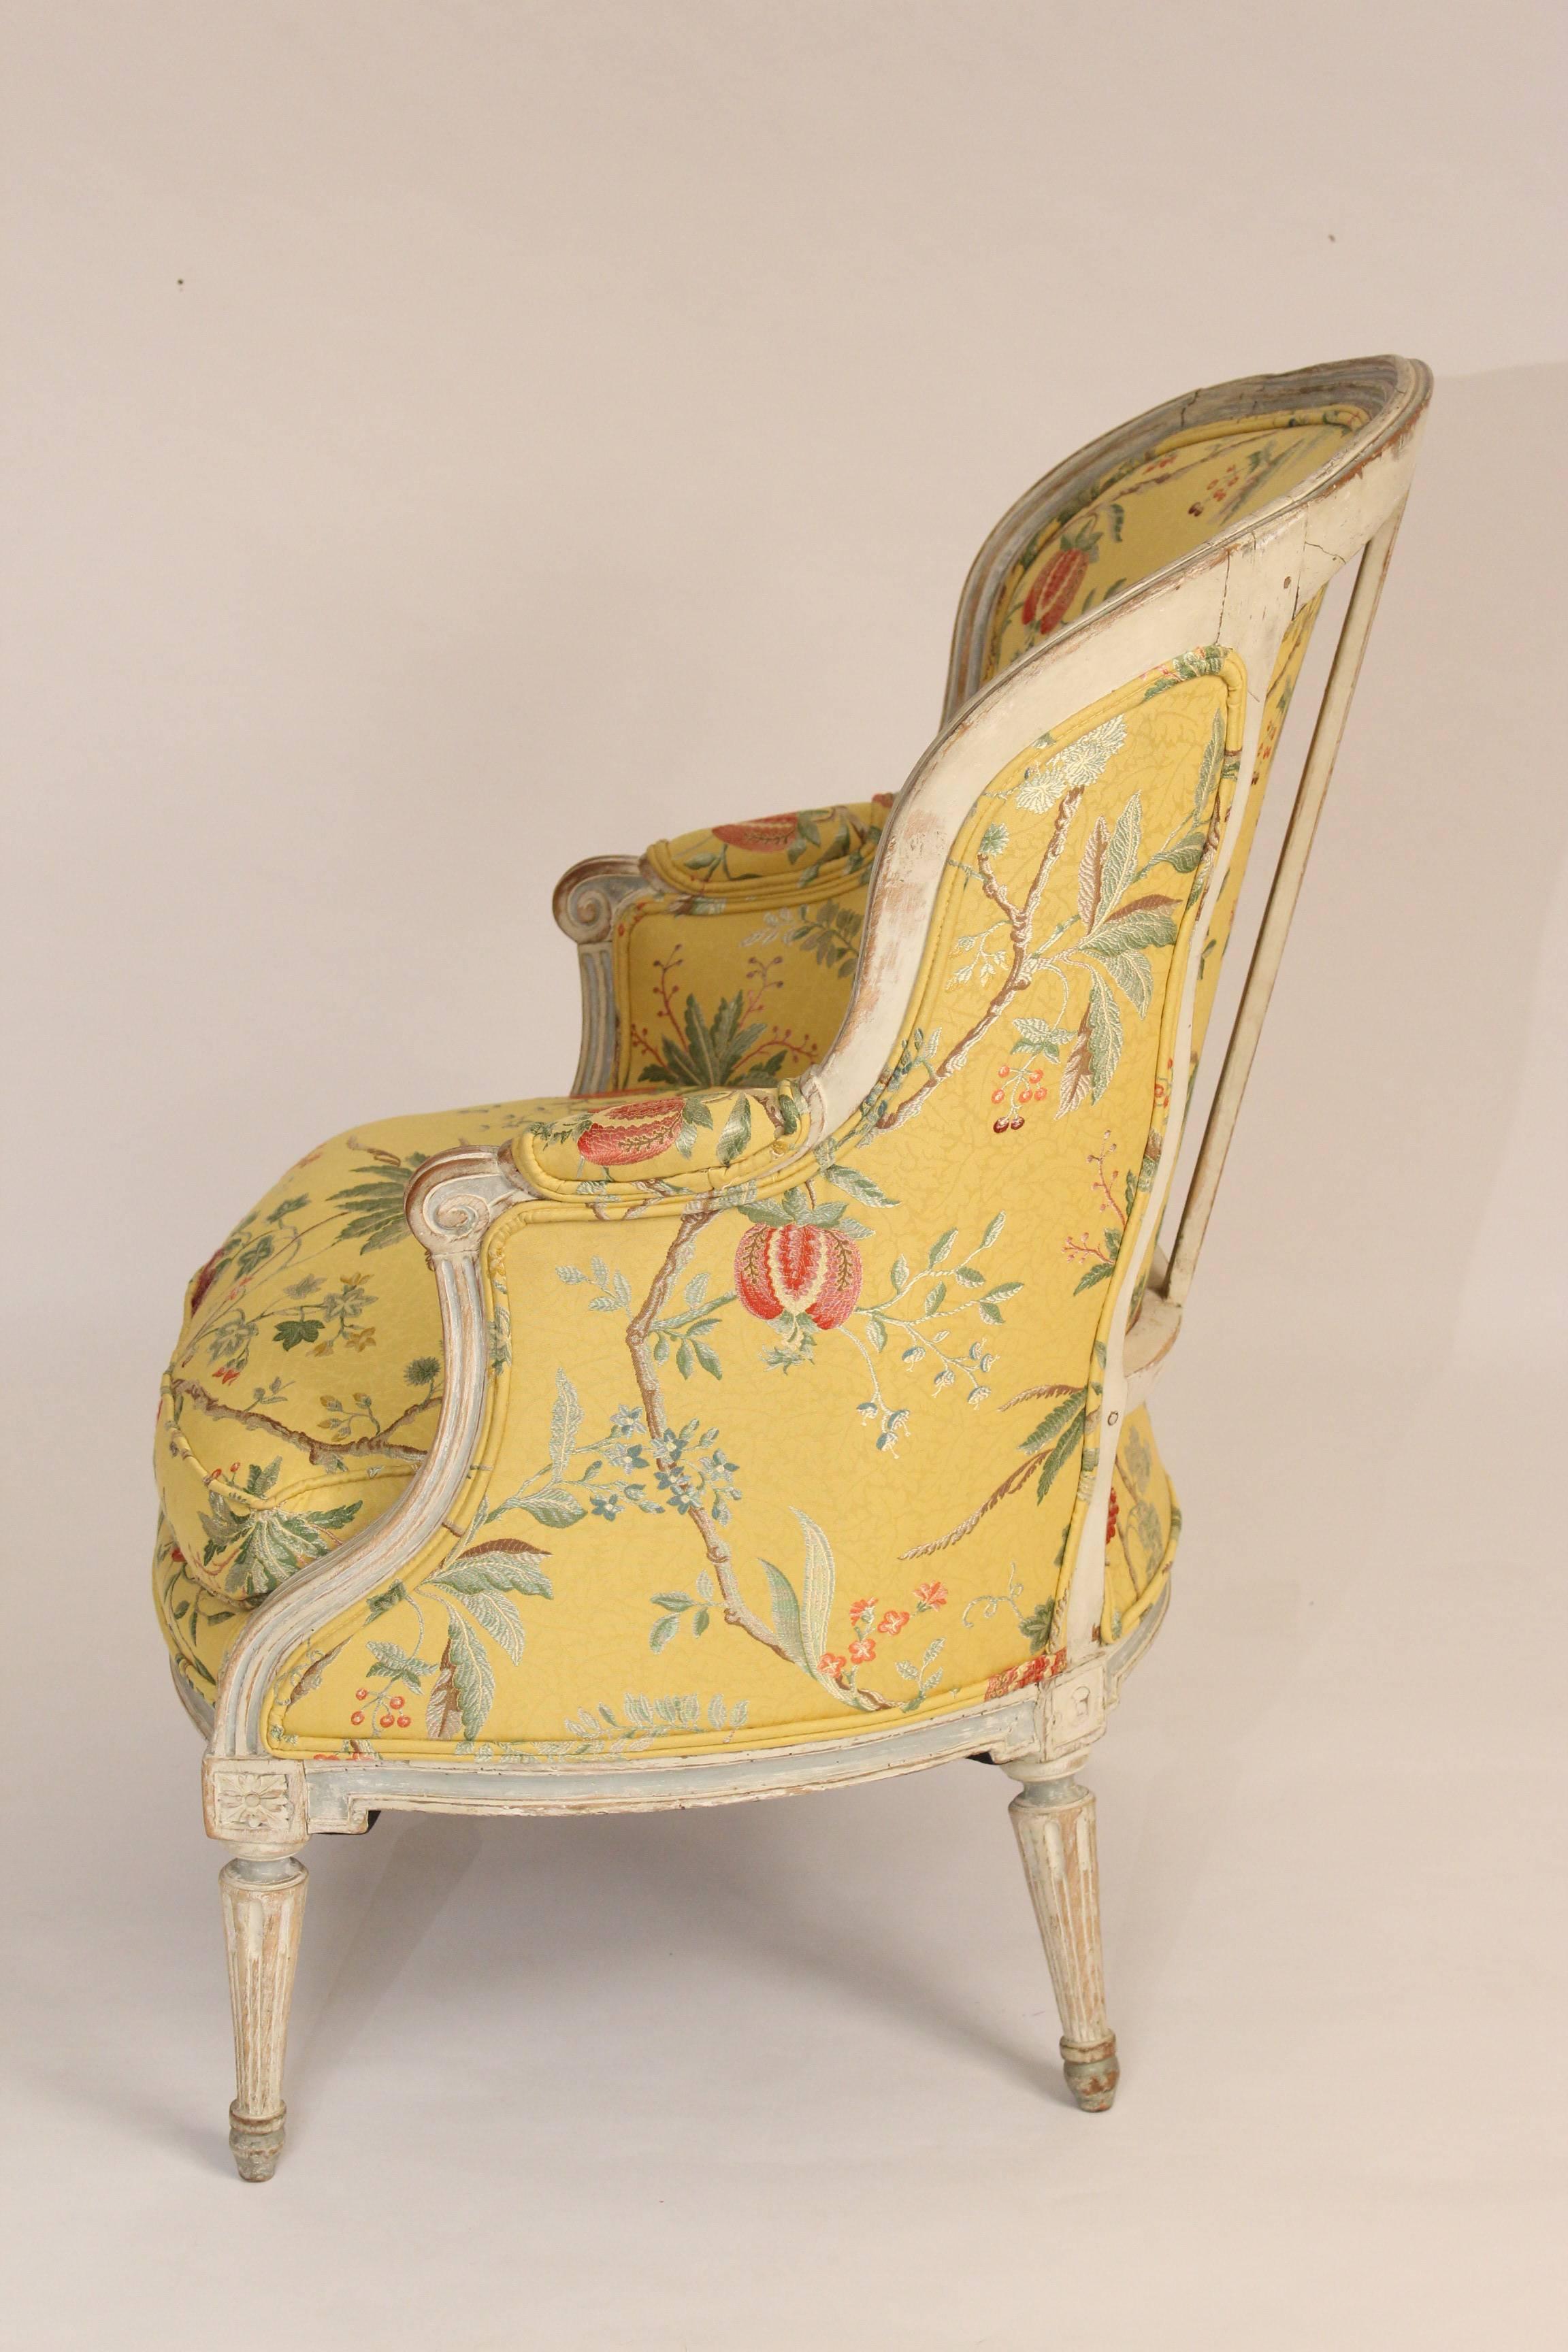 Louis XVI style painted bergere, 19th century. The color on the chair frame is grisaille / blue / white. The chair was recently upholstered, the upholstery is in excellent condition. The seat has down in it. The construction on the chair frame is